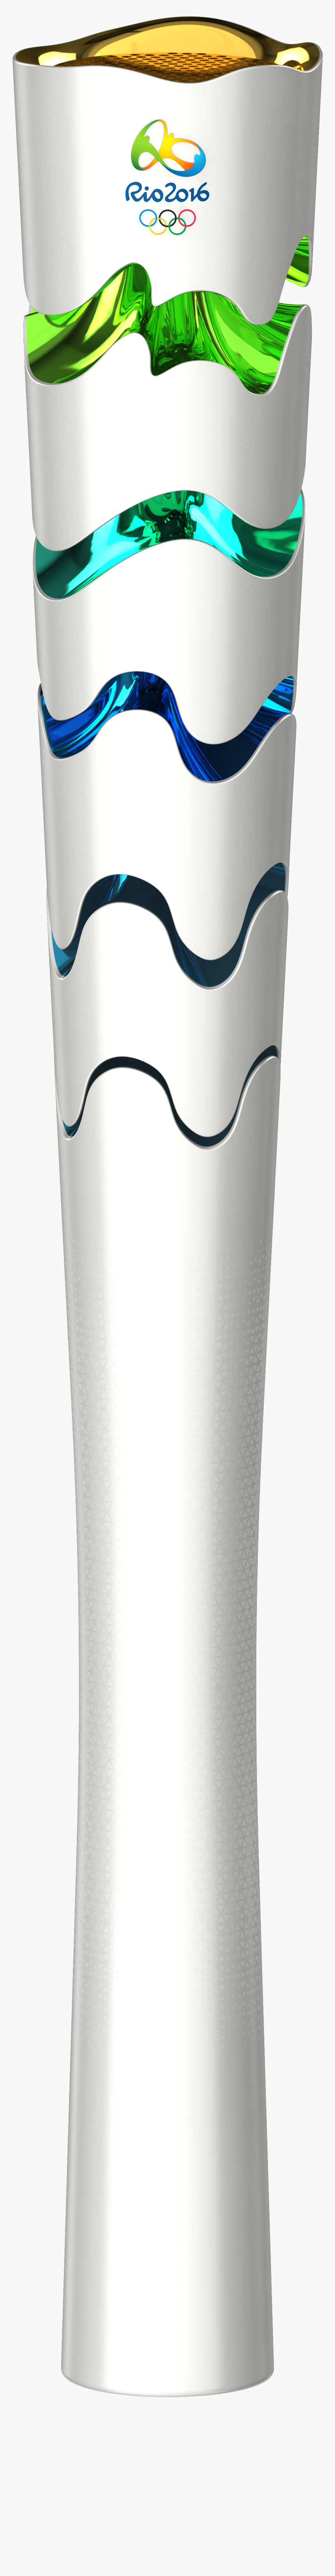 2016 Rio Olympic Torch, HD Png Download, Free Download